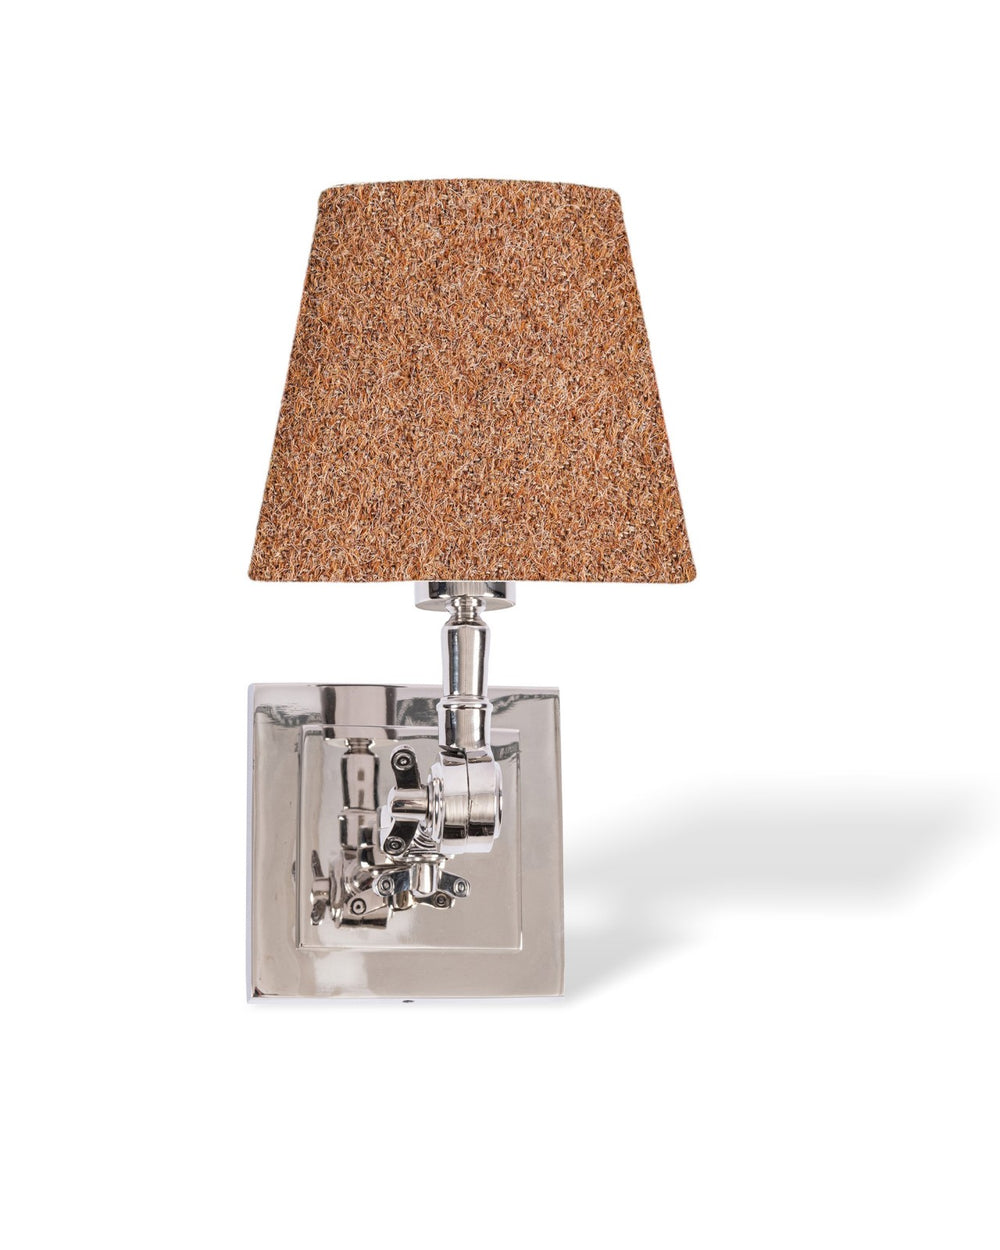 mind-the-gap-Tyrol-collection-Decke-lampshade-wall-shade-sconce-lampshade-brown-textile-wooly-cork-WS00010